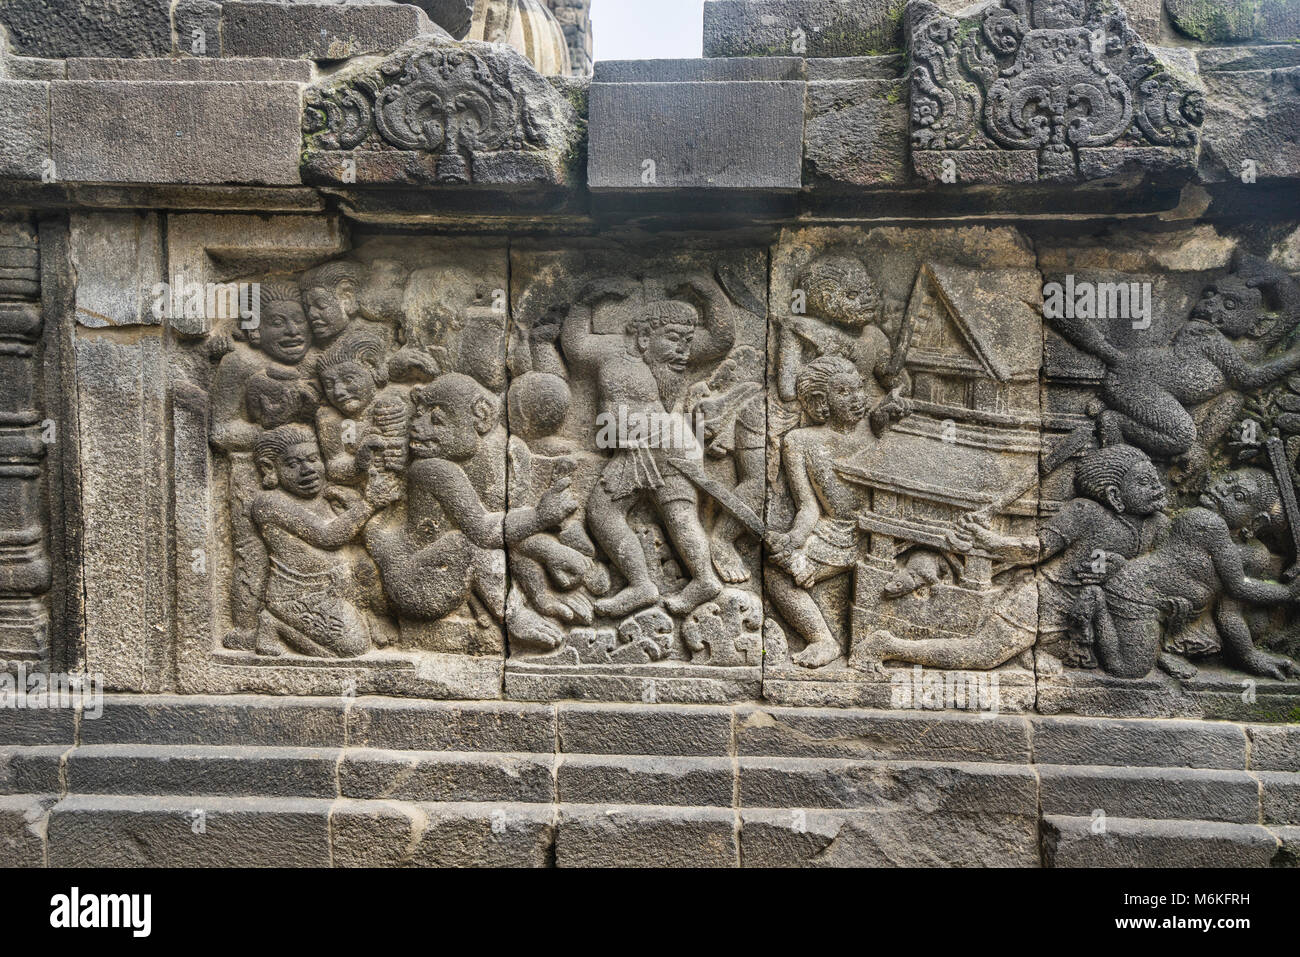 Indonesia, Central Java, bas-relief galleries along the balustrades of the Shiva temple at the mid-9th century Prambanan Hindu Temple complex Stock Photo